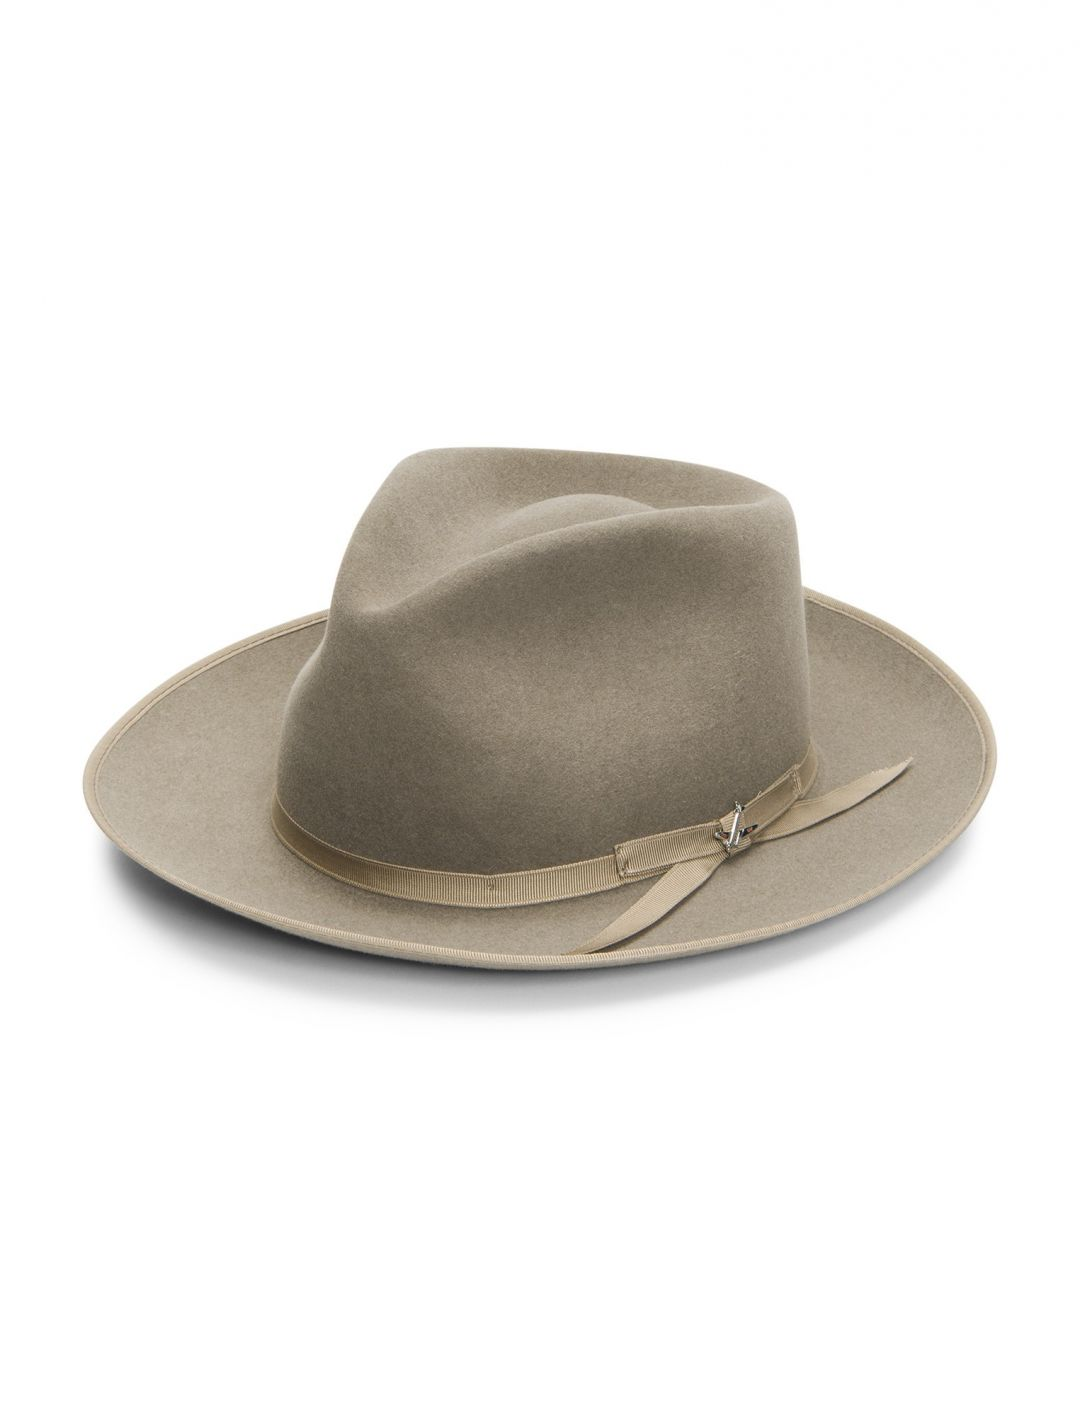 Read more about the article Stetson – Stratoliner Fedora